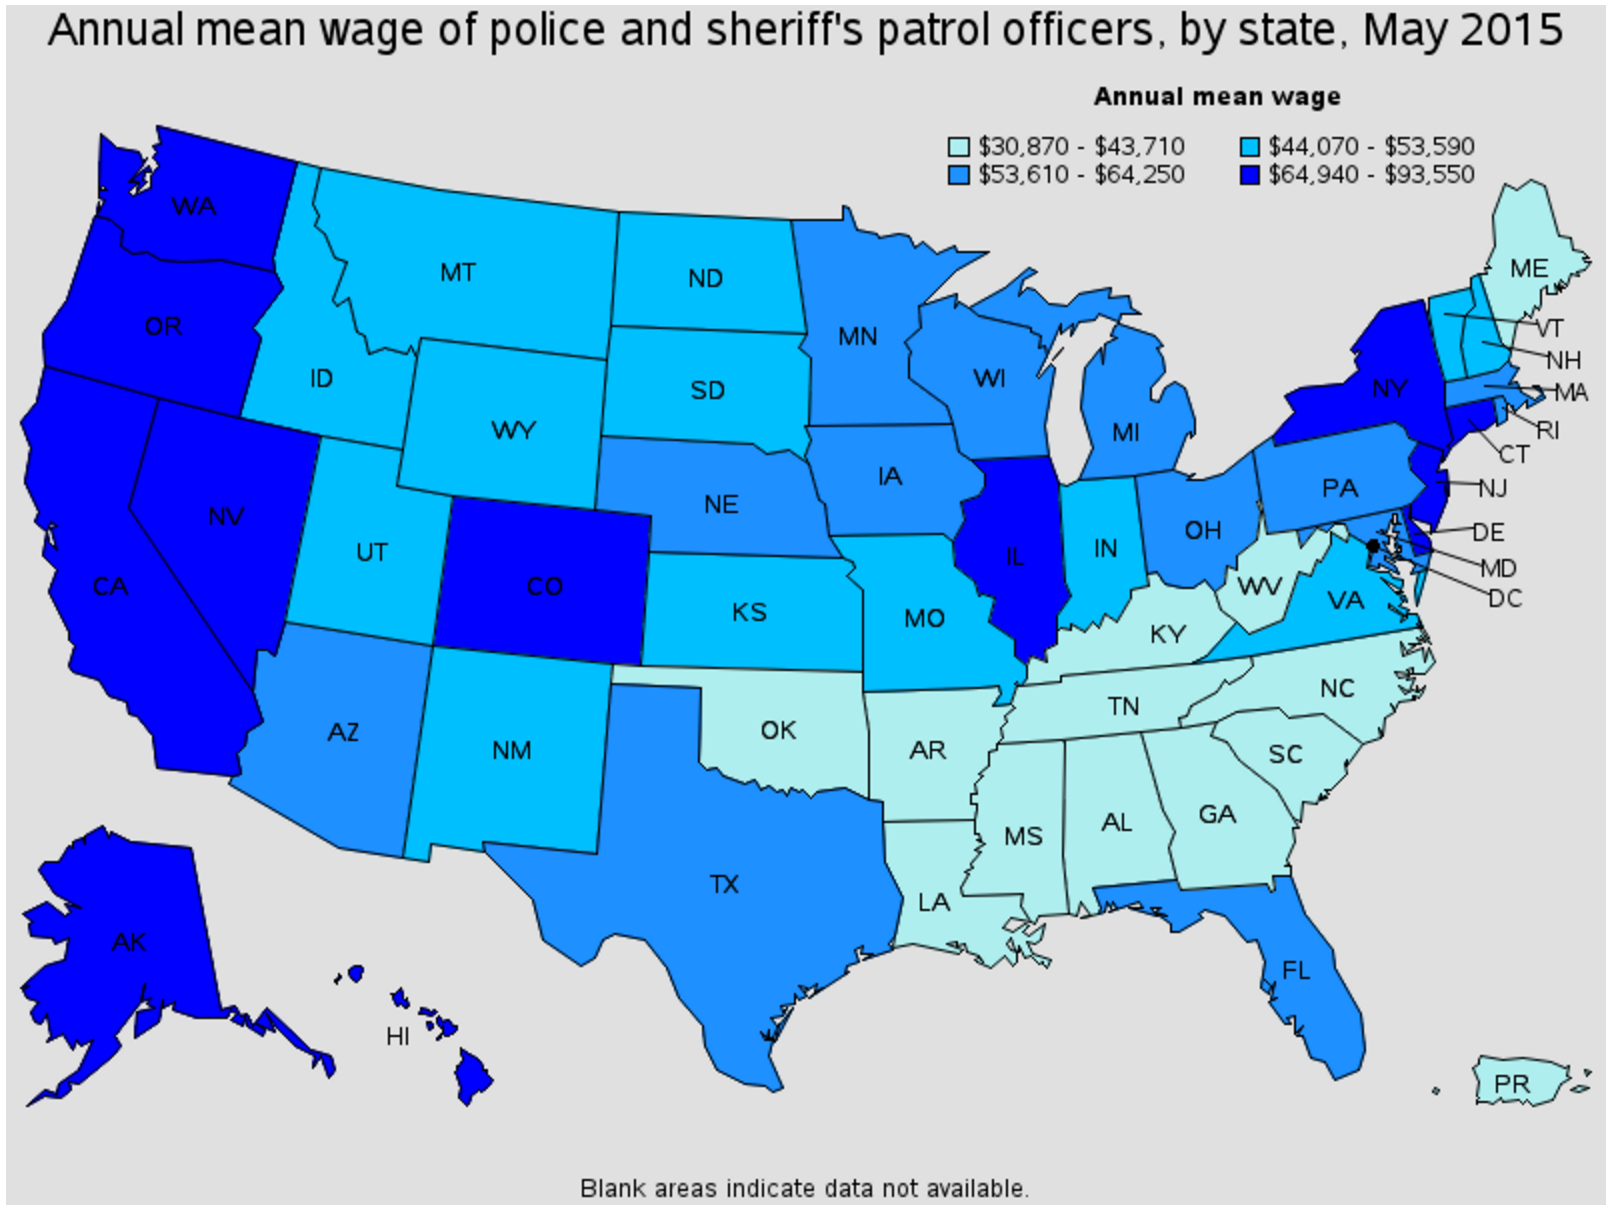 Westmoreland police officer average salary by state